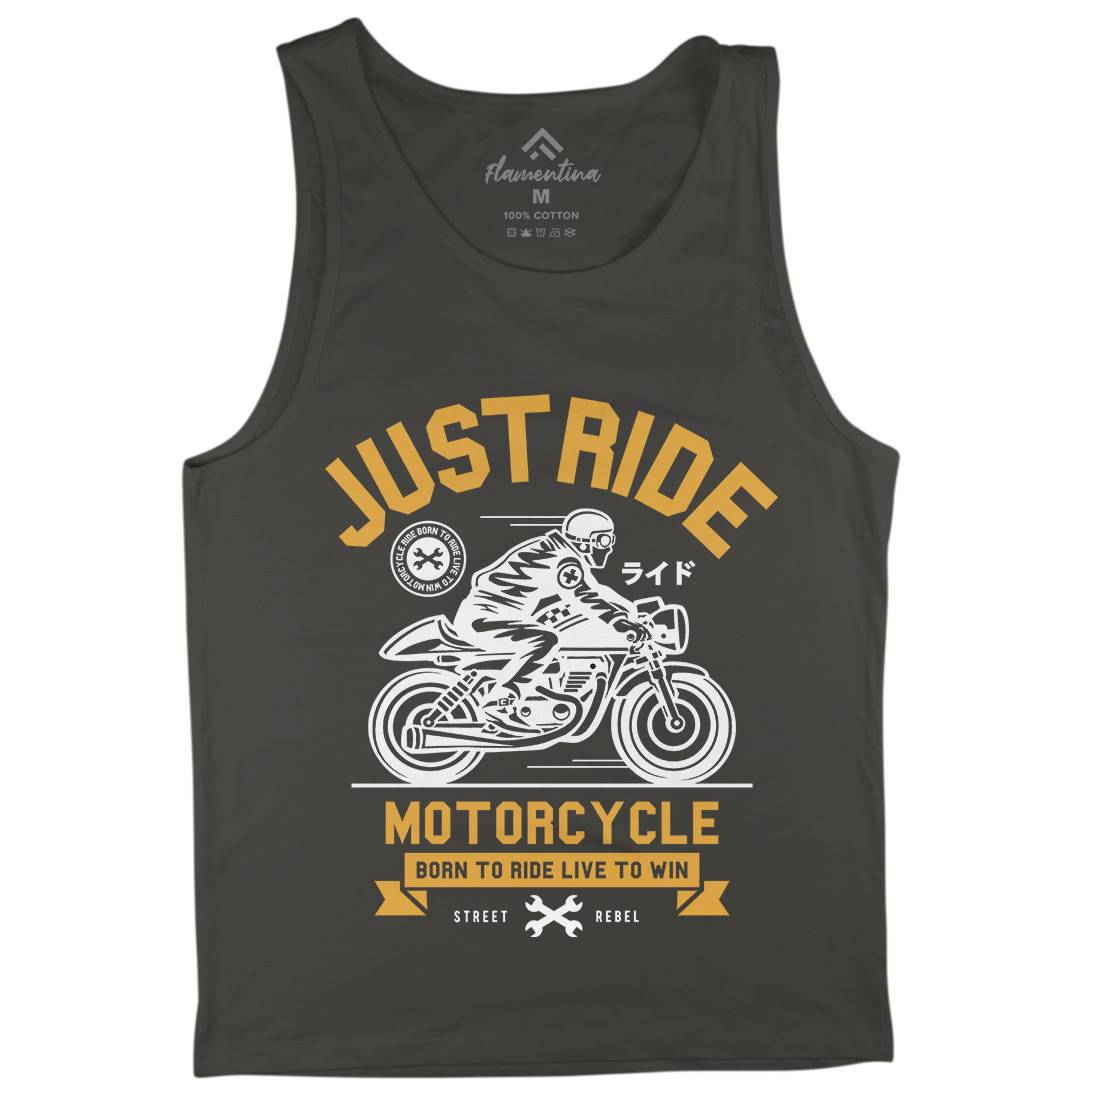 Just Ride Mens Tank Top Vest Motorcycles A244